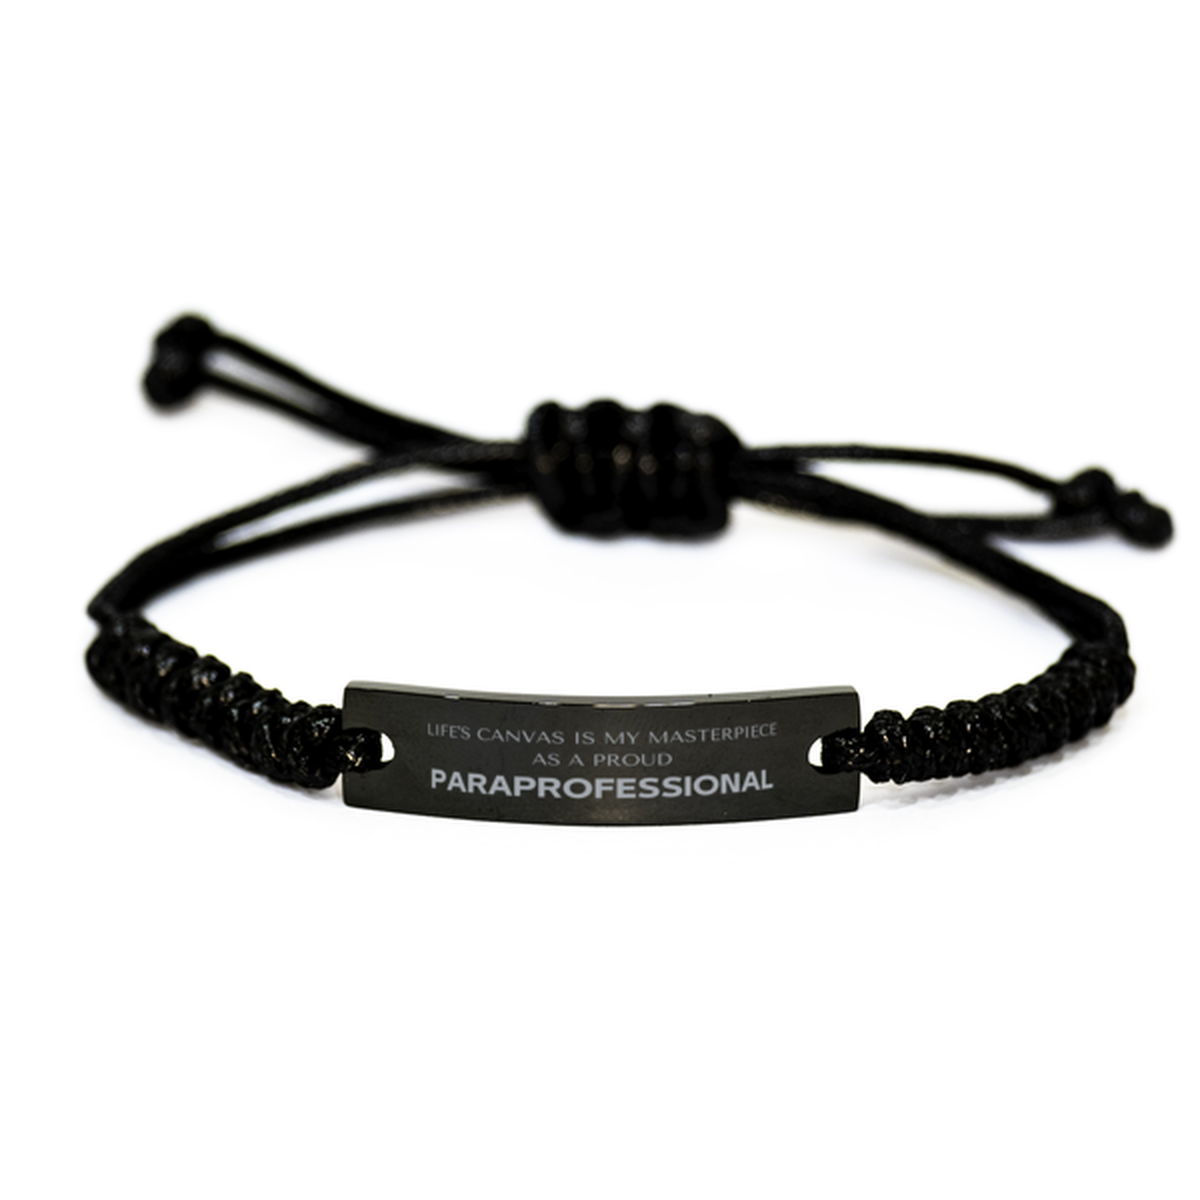 Proud Paraprofessional Gifts, Life's canvas is my masterpiece, Epic Birthday Christmas Unique Black Rope Bracelet For Paraprofessional, Coworkers, Men, Women, Friends